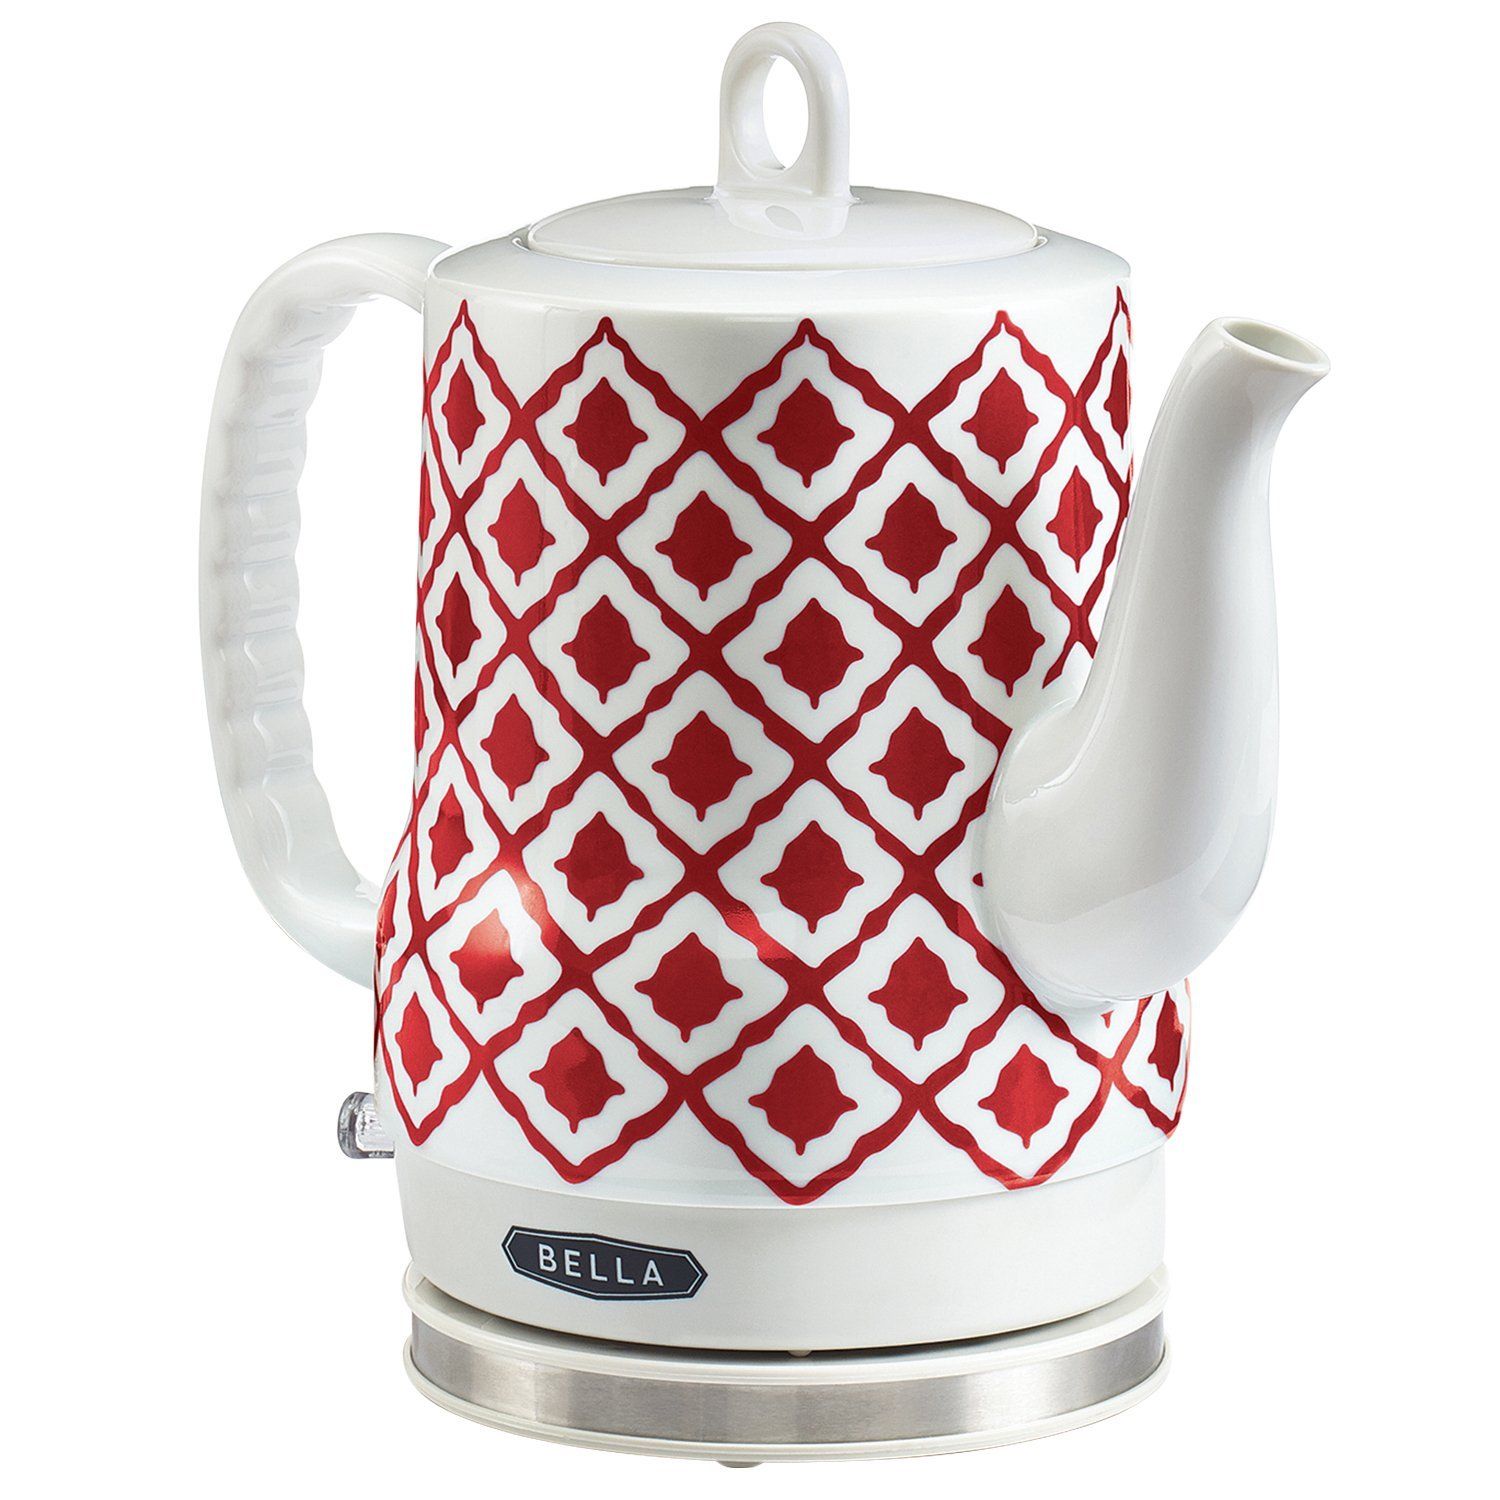 Bella 1.2l Electric Ceramic Tea Kettle With Detachable Base and Boil ...